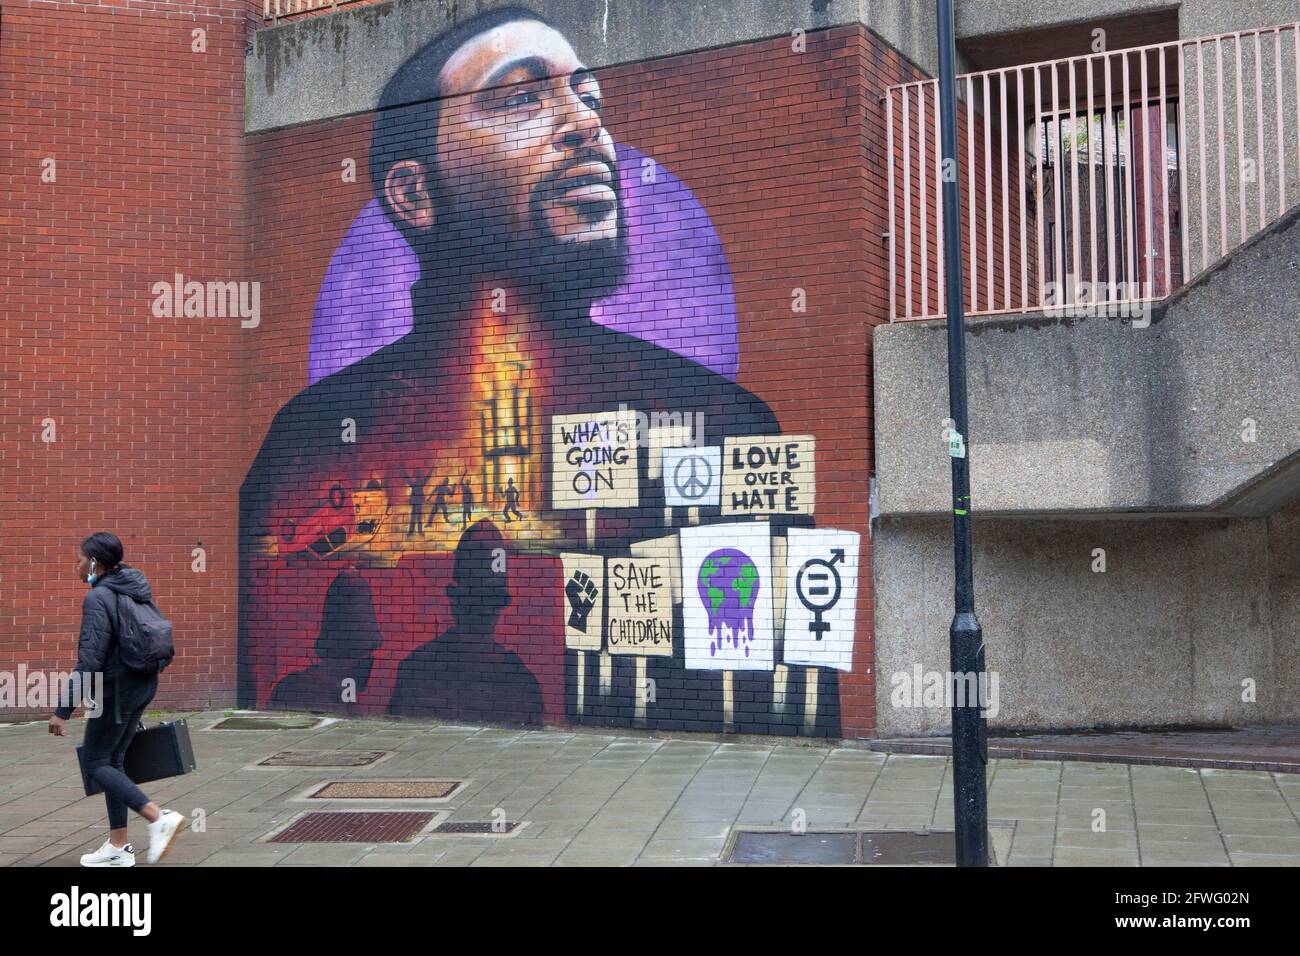 London, UK, 22 May 2021: The artist Dreph (Neequaye Dreph Dsane) has painted a mural of Marvin Gaye in Brixton, which also references the Brixton Uprisings of 1981. Commissioned by Universal Music Group, the mural commemorates this week's 50th anniversary of the release of Gaye's iconic album 'What's Going On'. This year is also the 40th anniversary of the Brixton Uprisings which started in protest against police violence. The location on Canterbury Crescent is next to Lambeth Council's former offices at International House and just a few metres away from Brixton police station. Anna Watson/Al Stock Photo